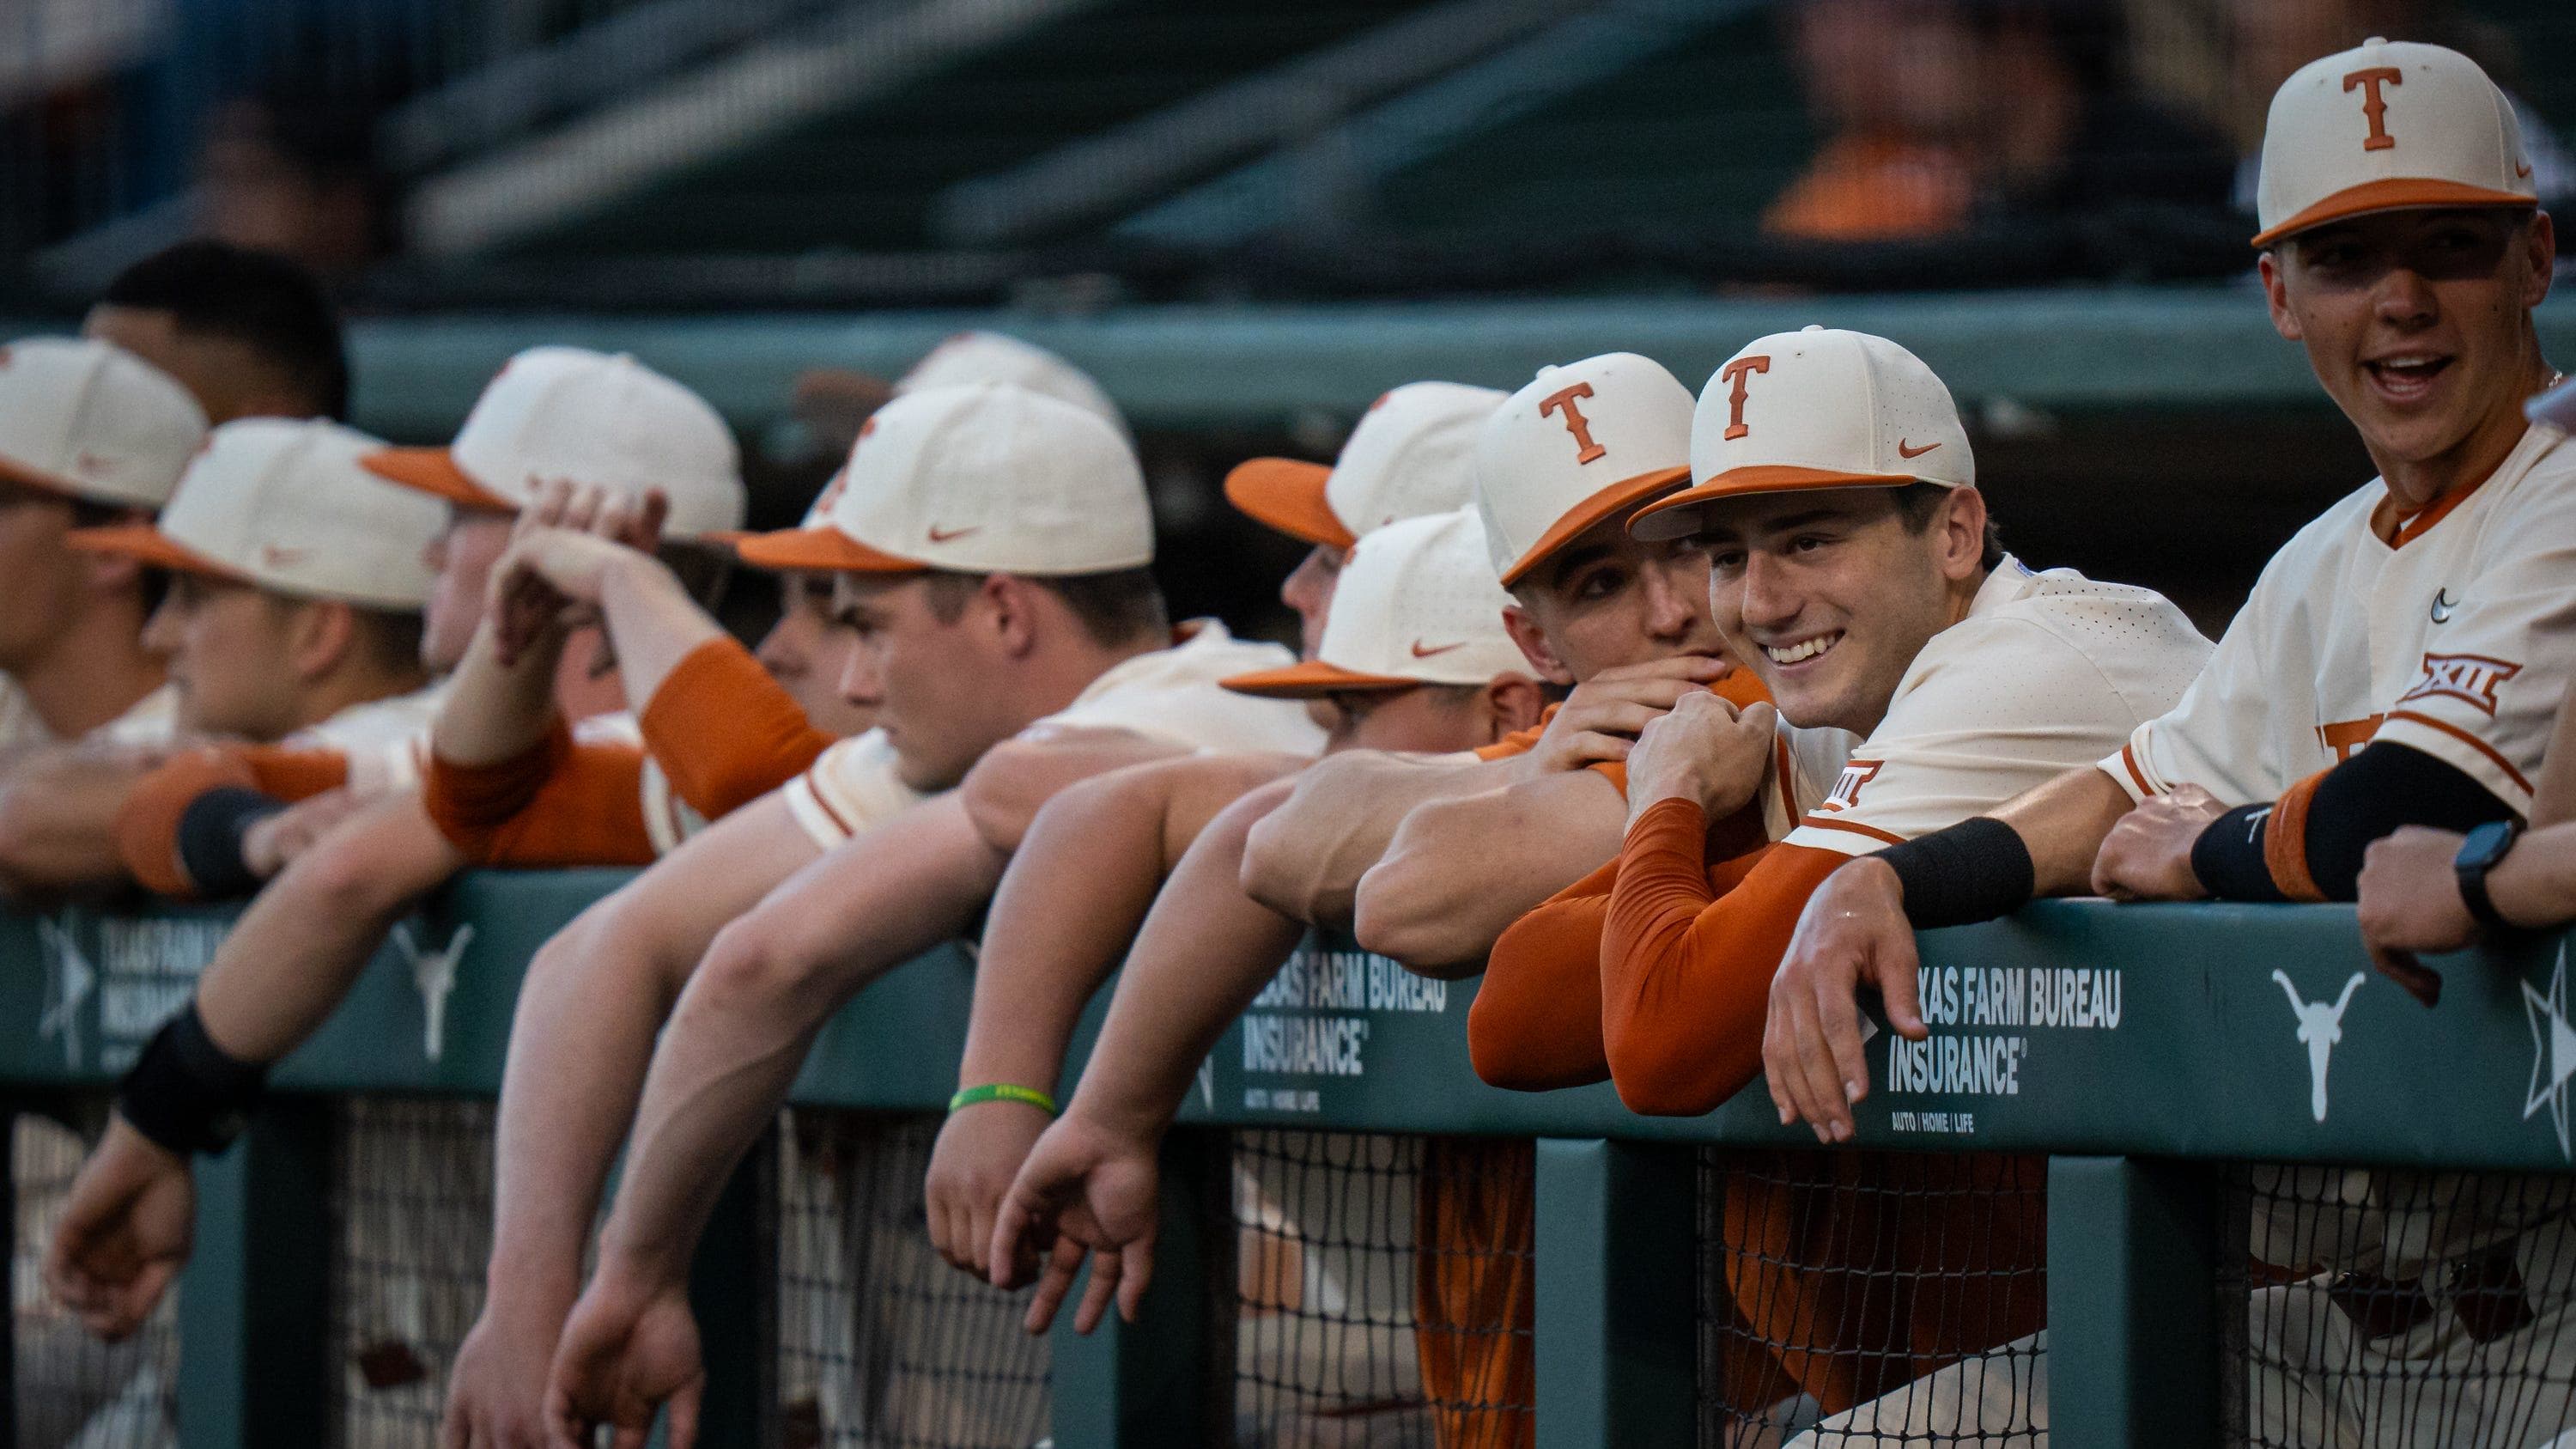 The Texas dugout smile and chat ahead of the Longhorns' game against the Texas A&M Aggies at the